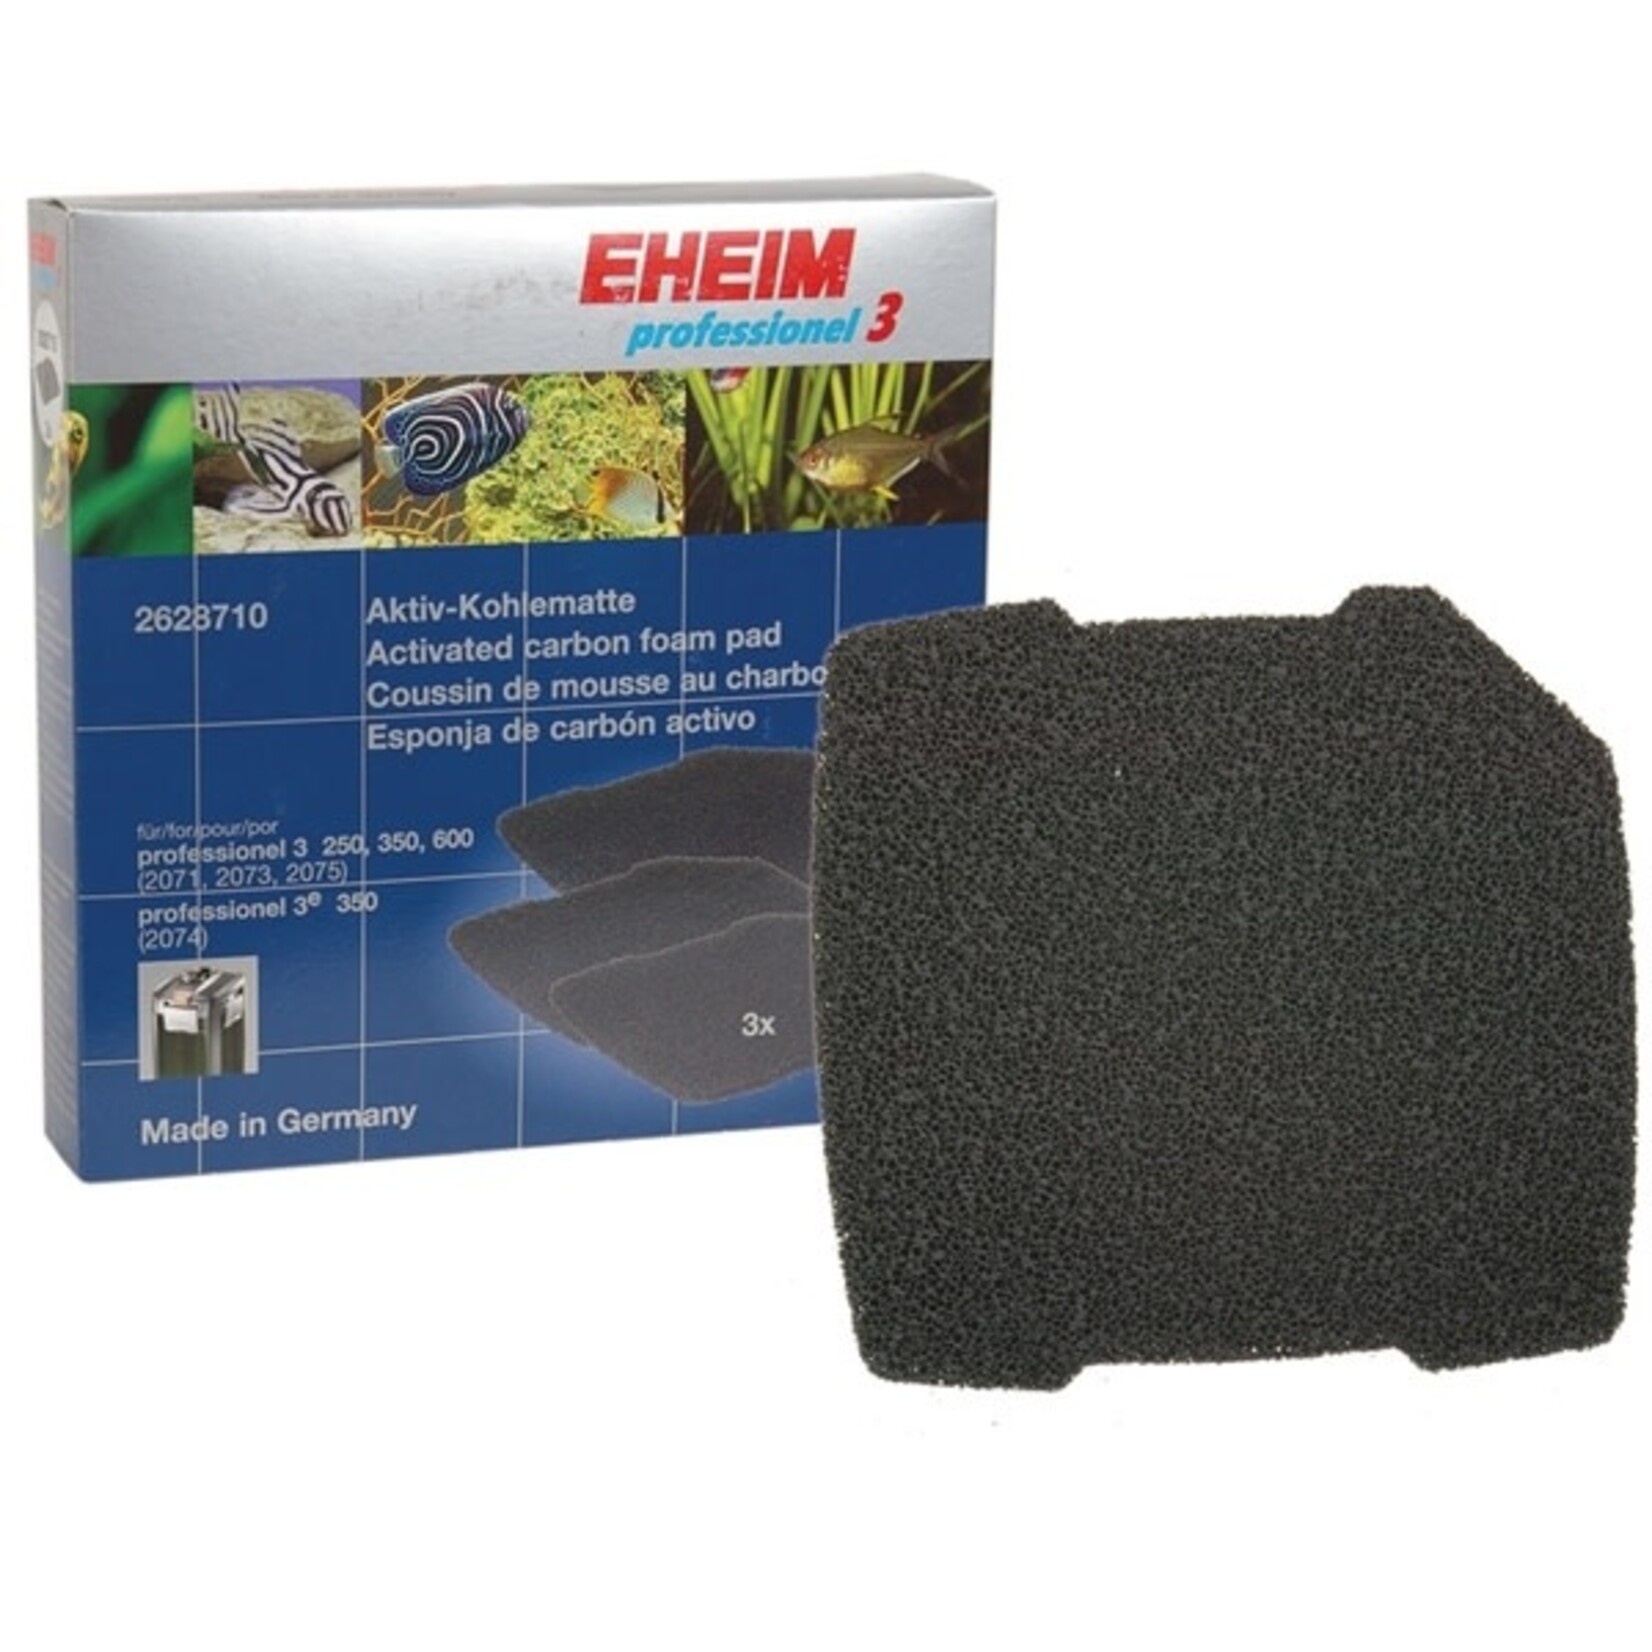 Eheim carbon filter disc for professional 4+ 250/350/600 / prof 5e 350